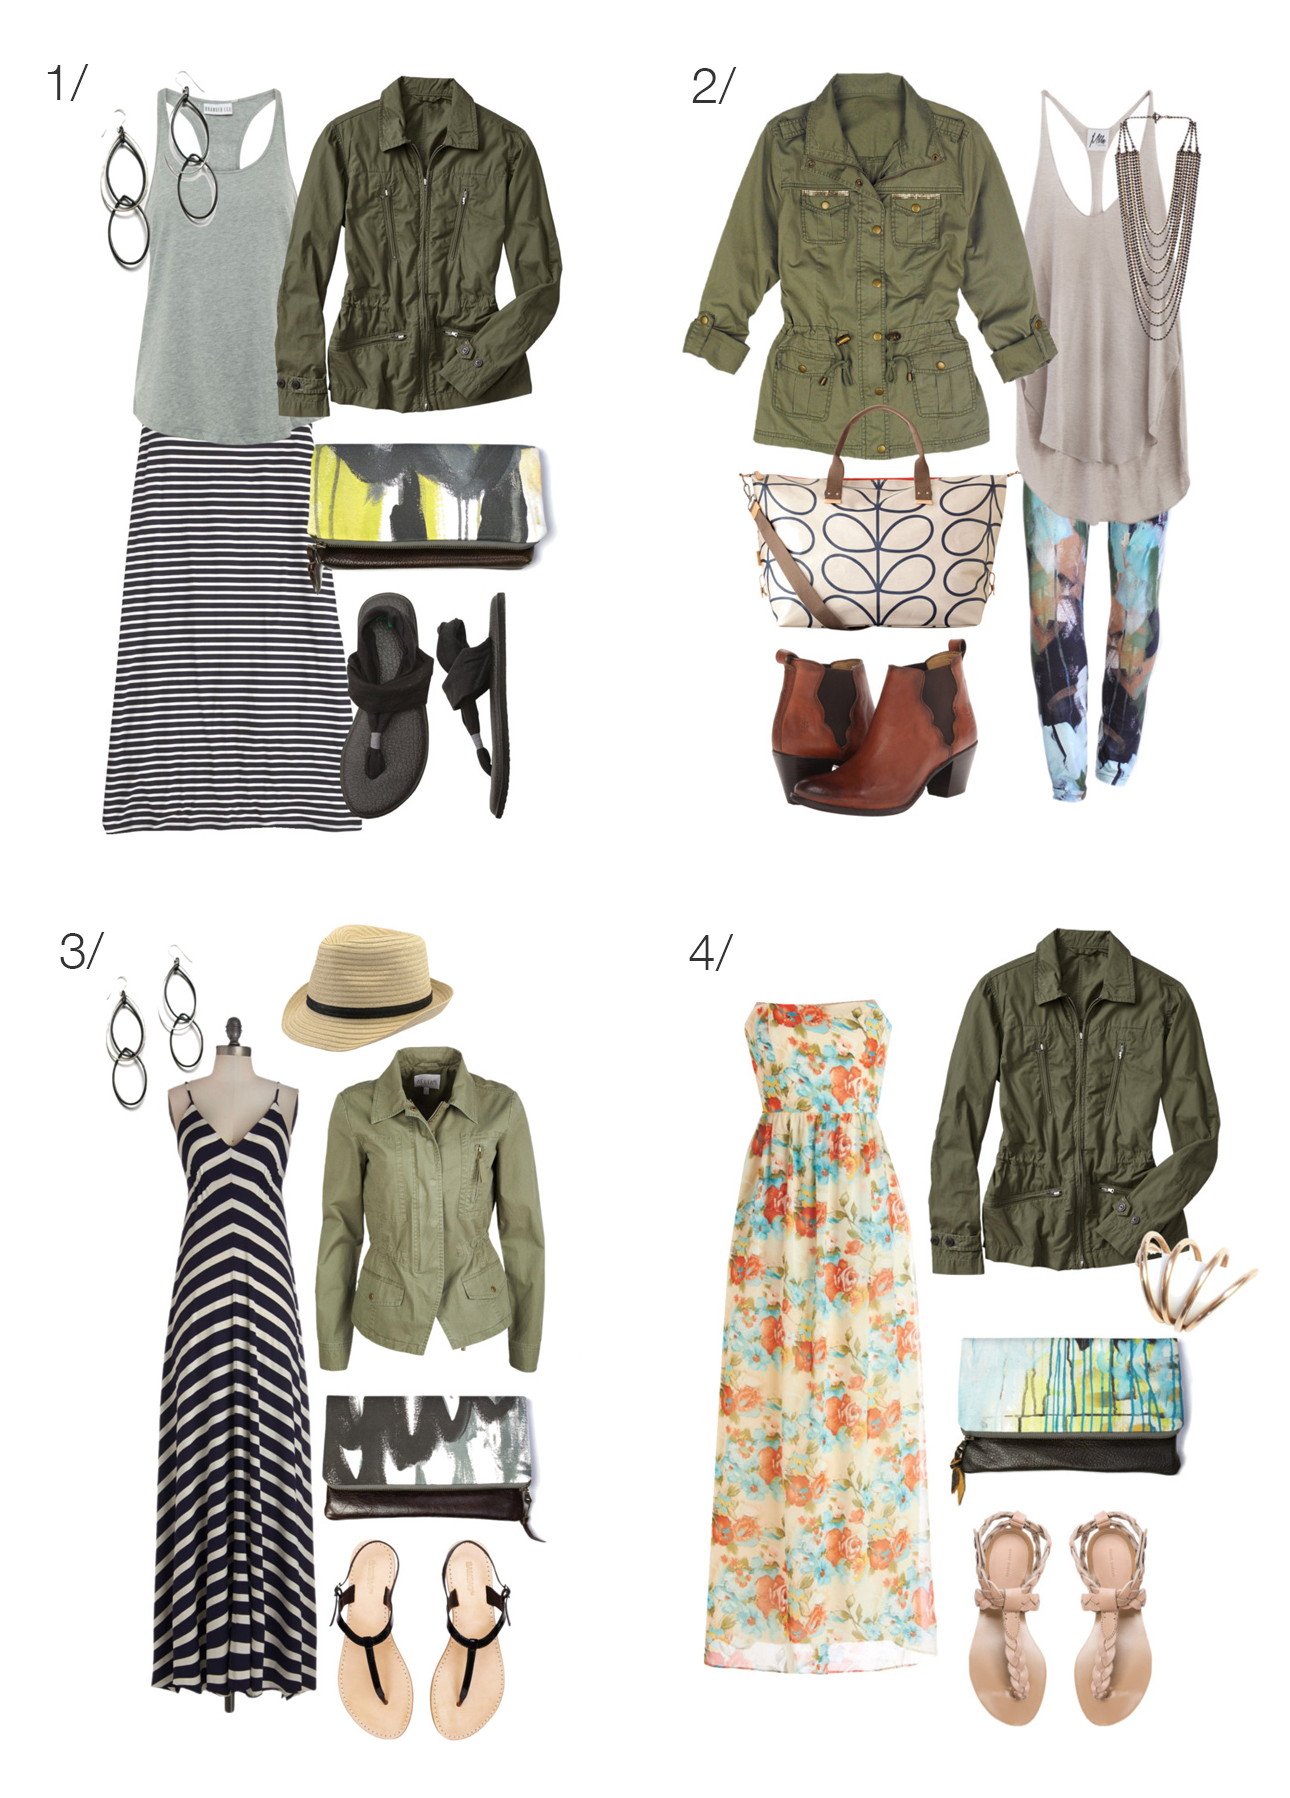 8 ways to wear a military jacket via megan auman // click for outfit details